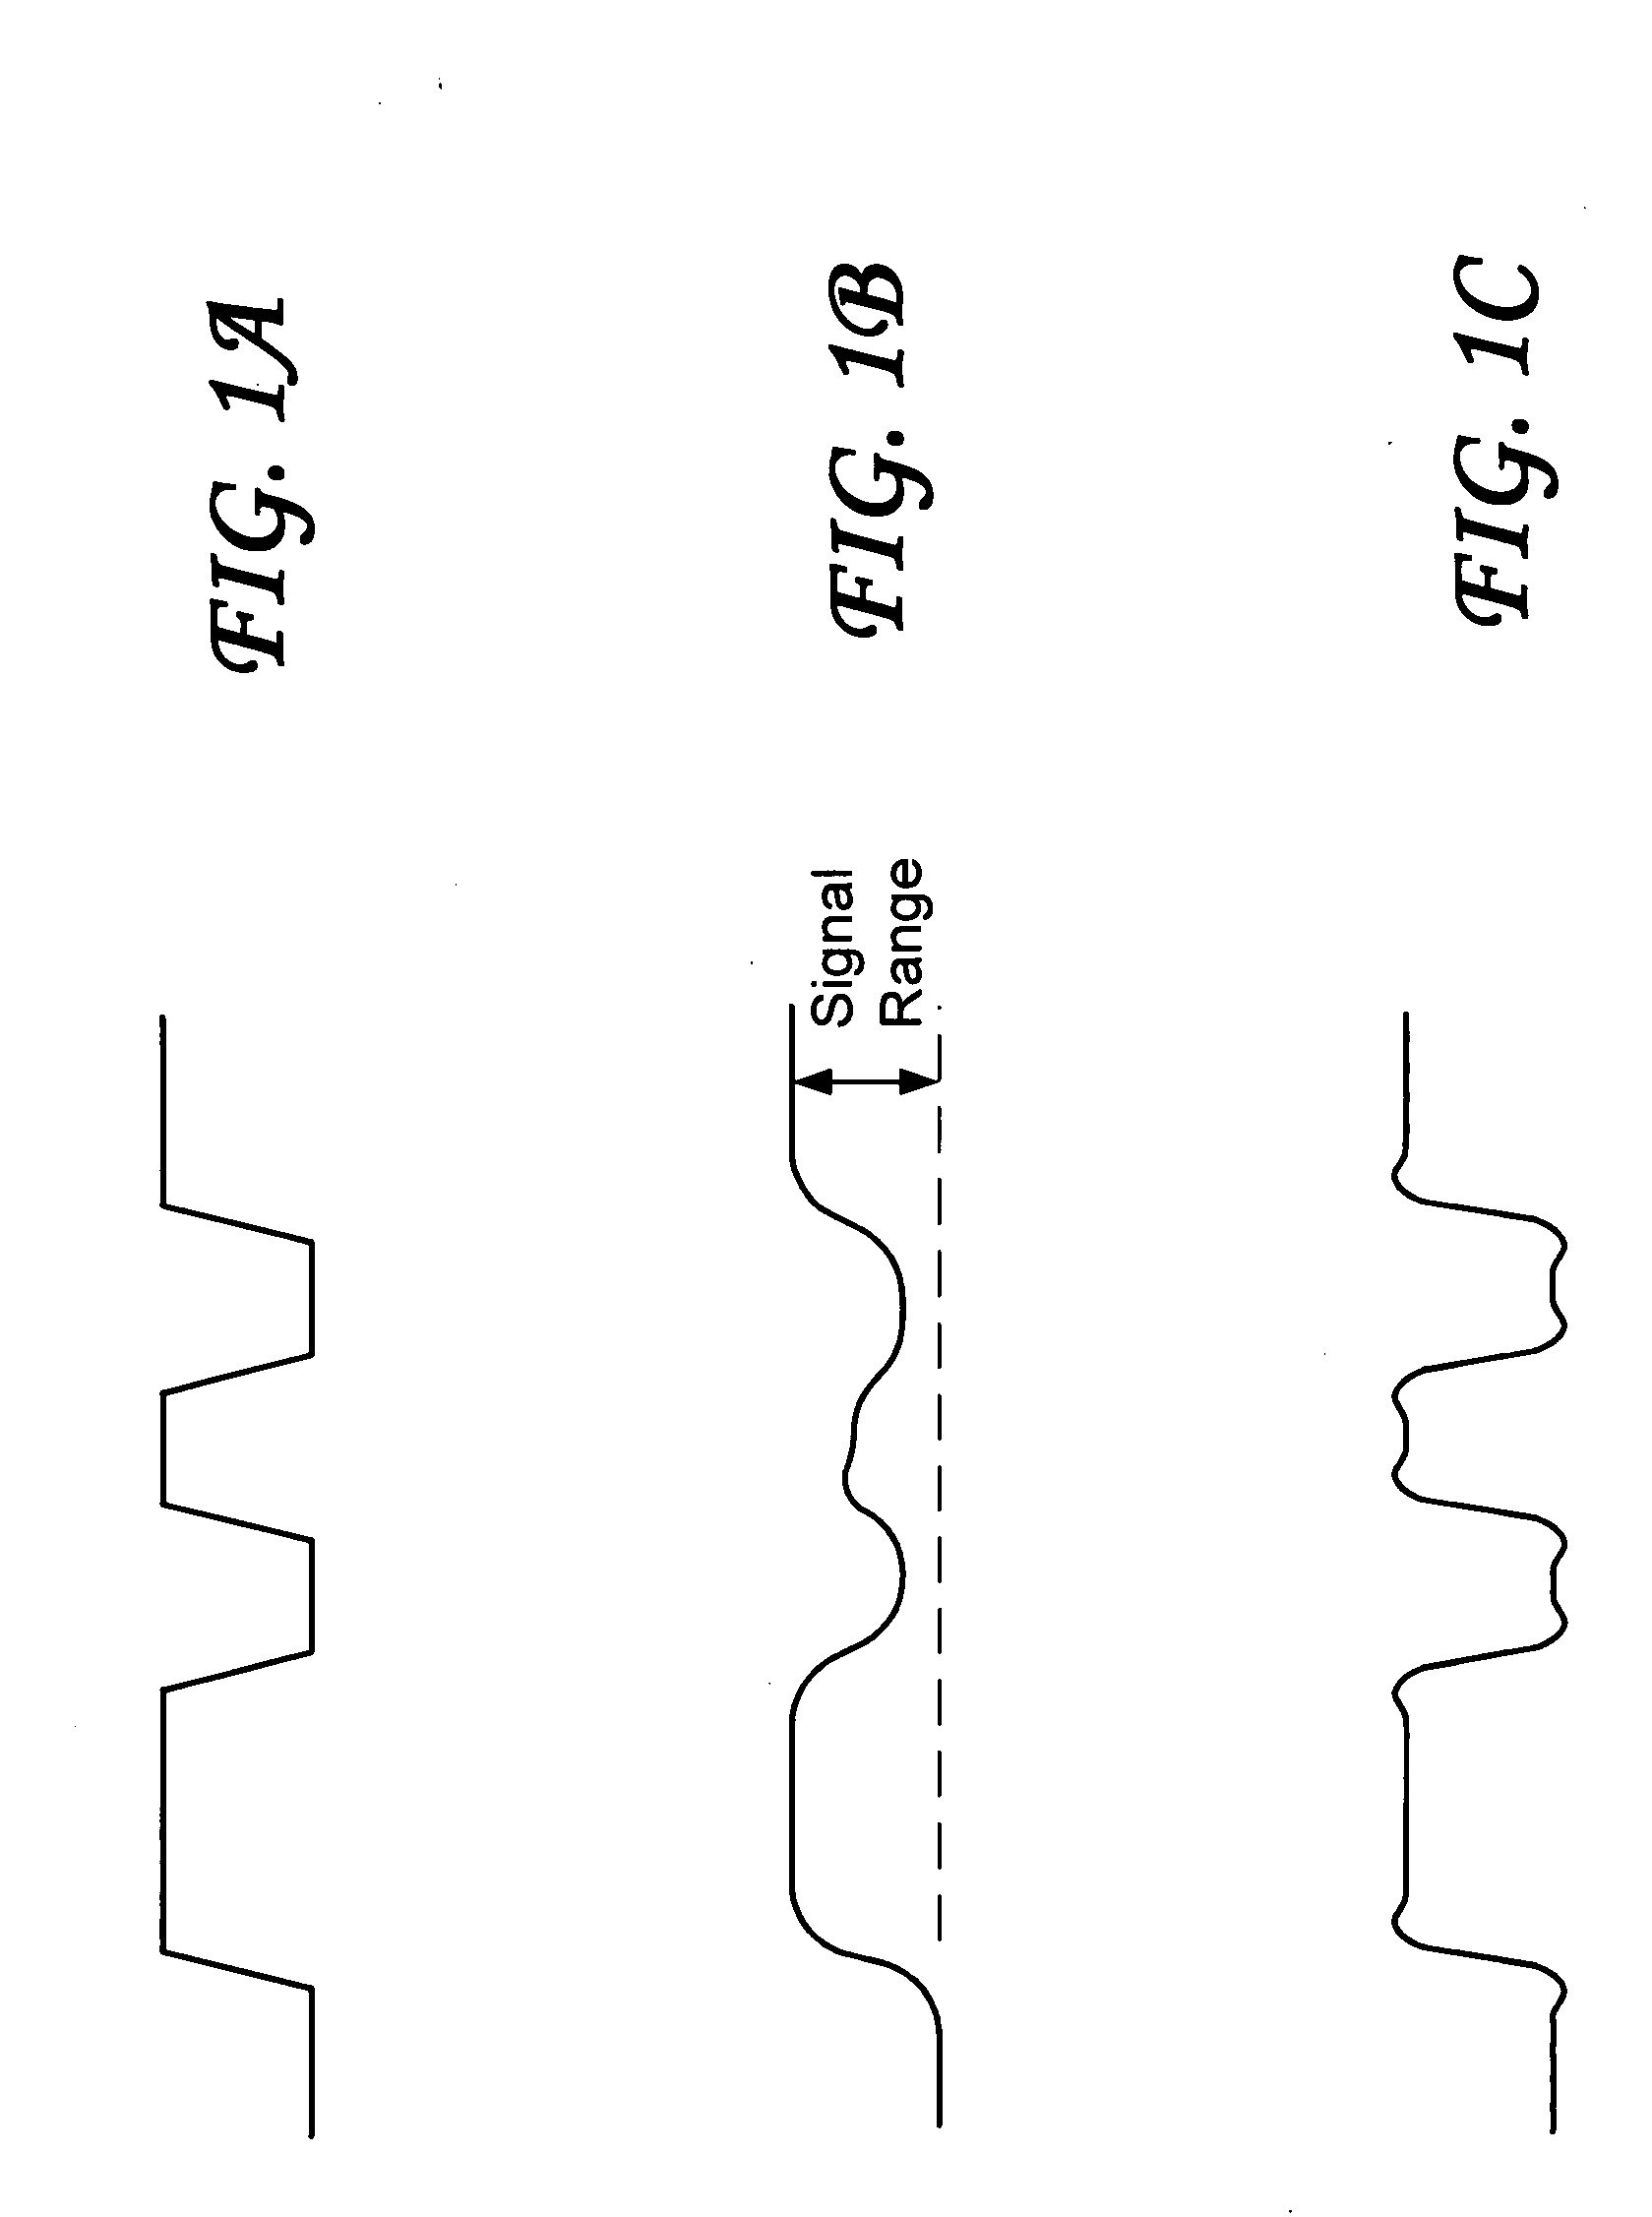 High-speed cable with embedded power control